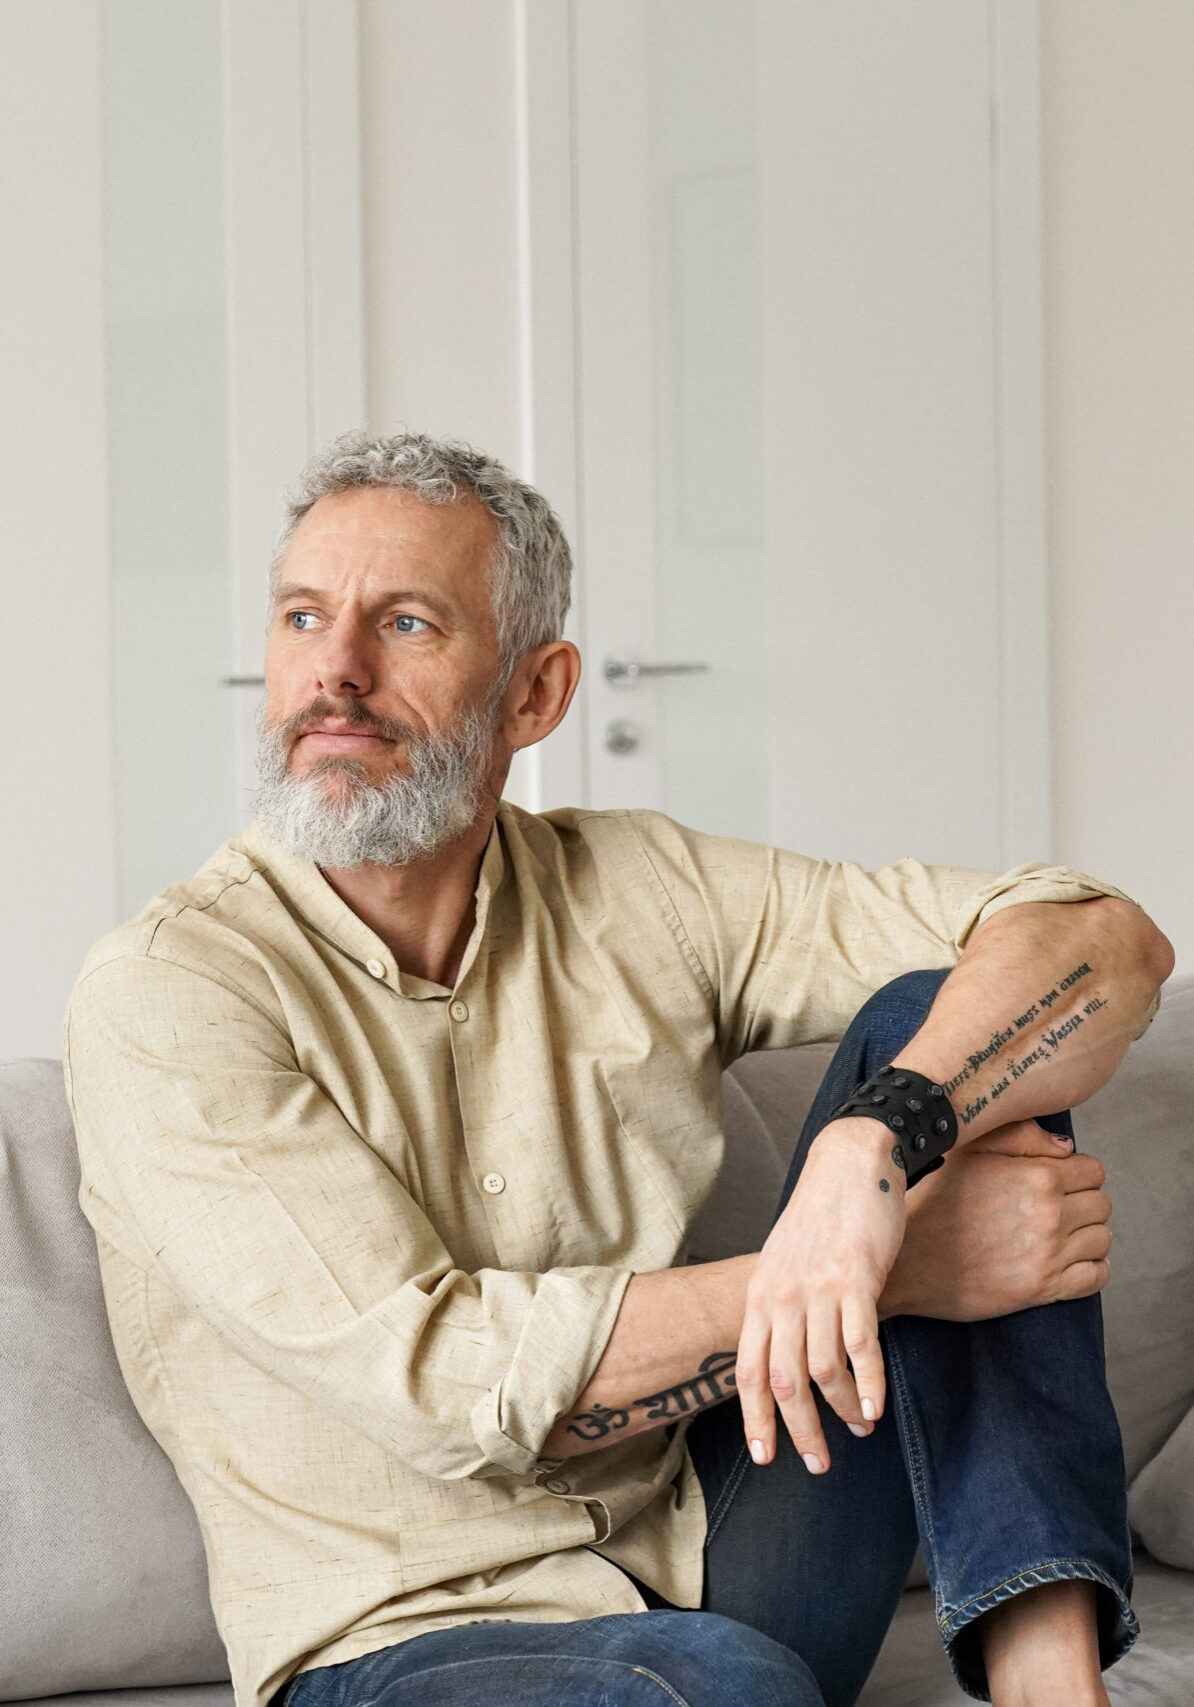 Relaxed mature older thoughtful tattooed hipster man relaxing sitting on sofa and thinking at home. Pensive calm stylish mid aged single bearded guy resting on couch at home looking away, reflecting.